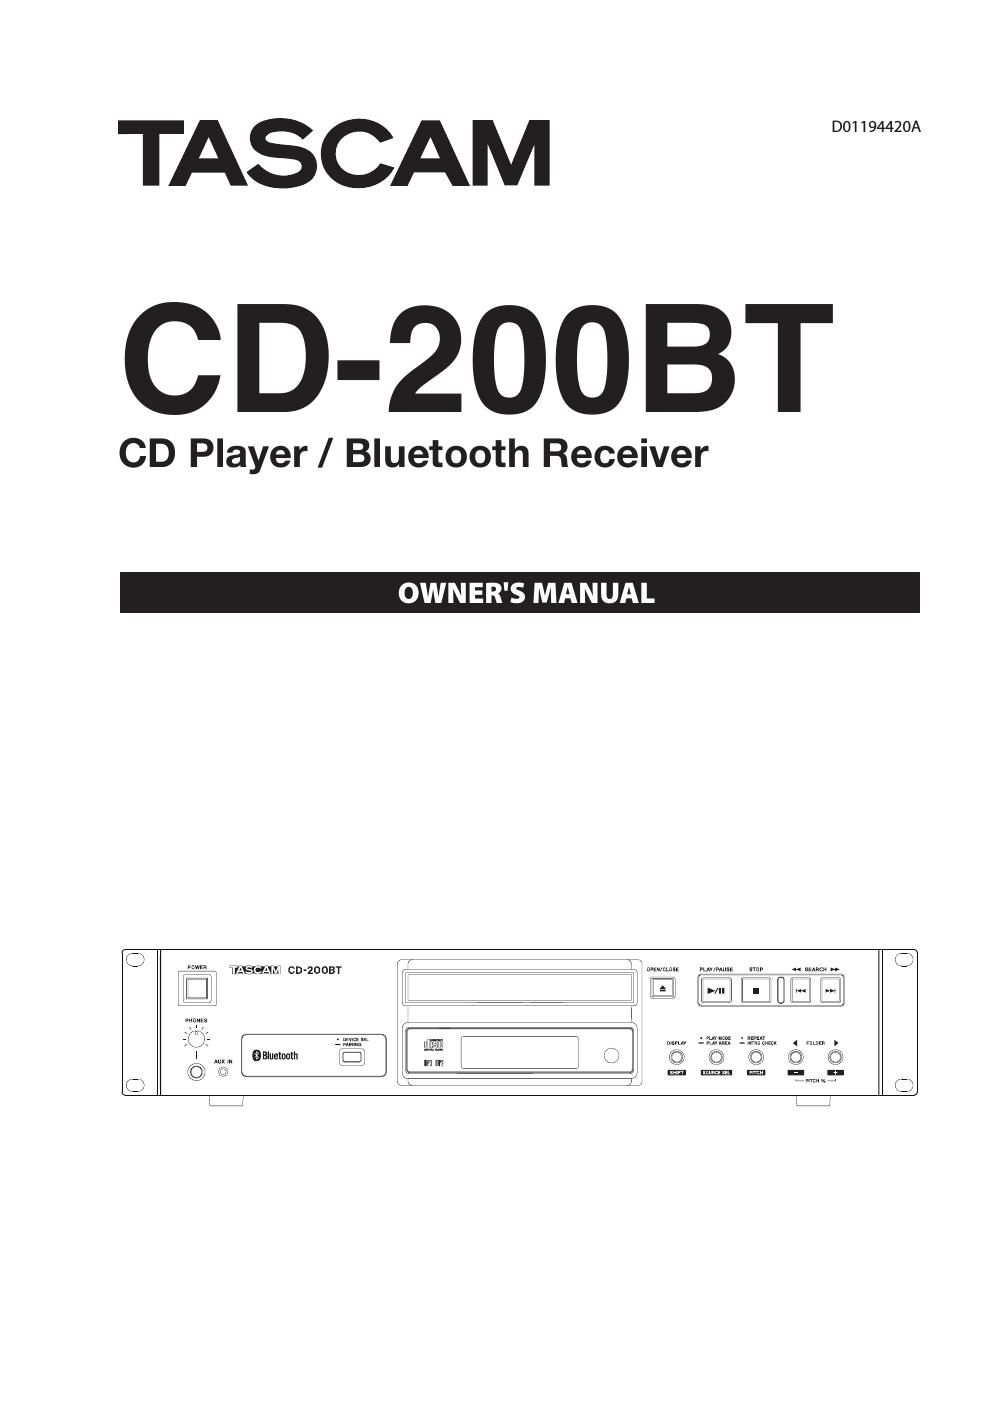 Tascam CD 200BT Owners Manual